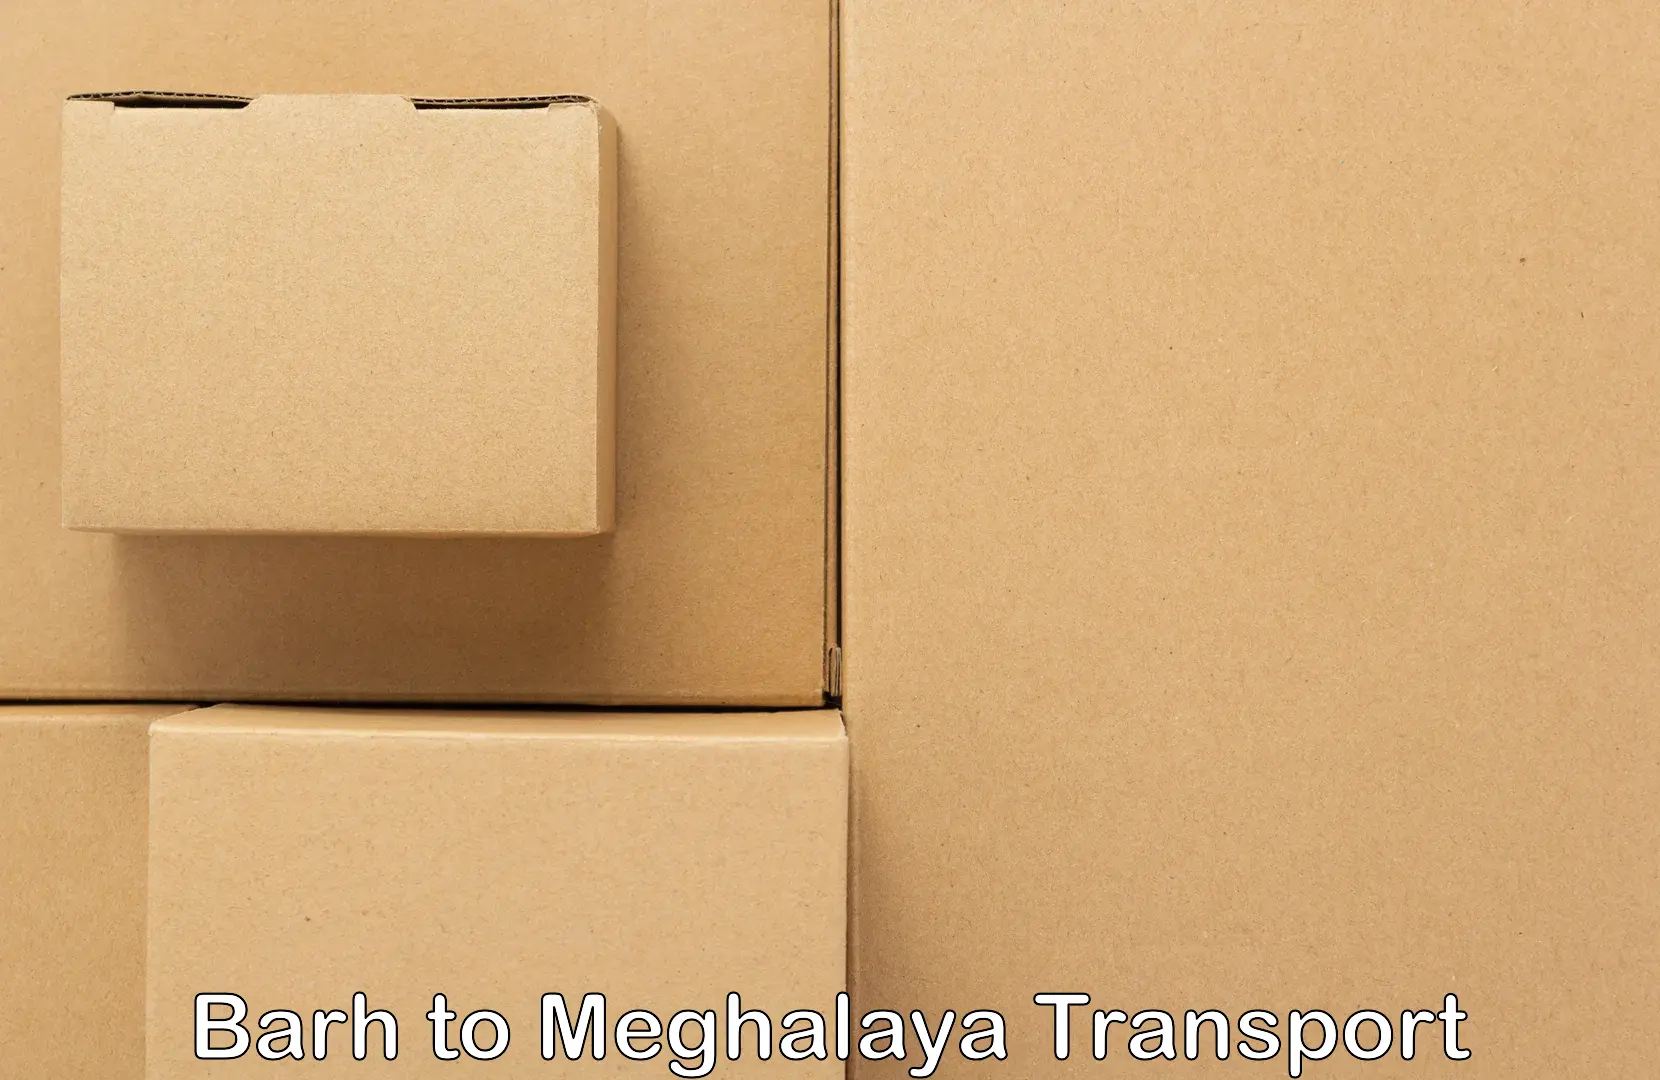 Air freight transport services in Barh to Shillong